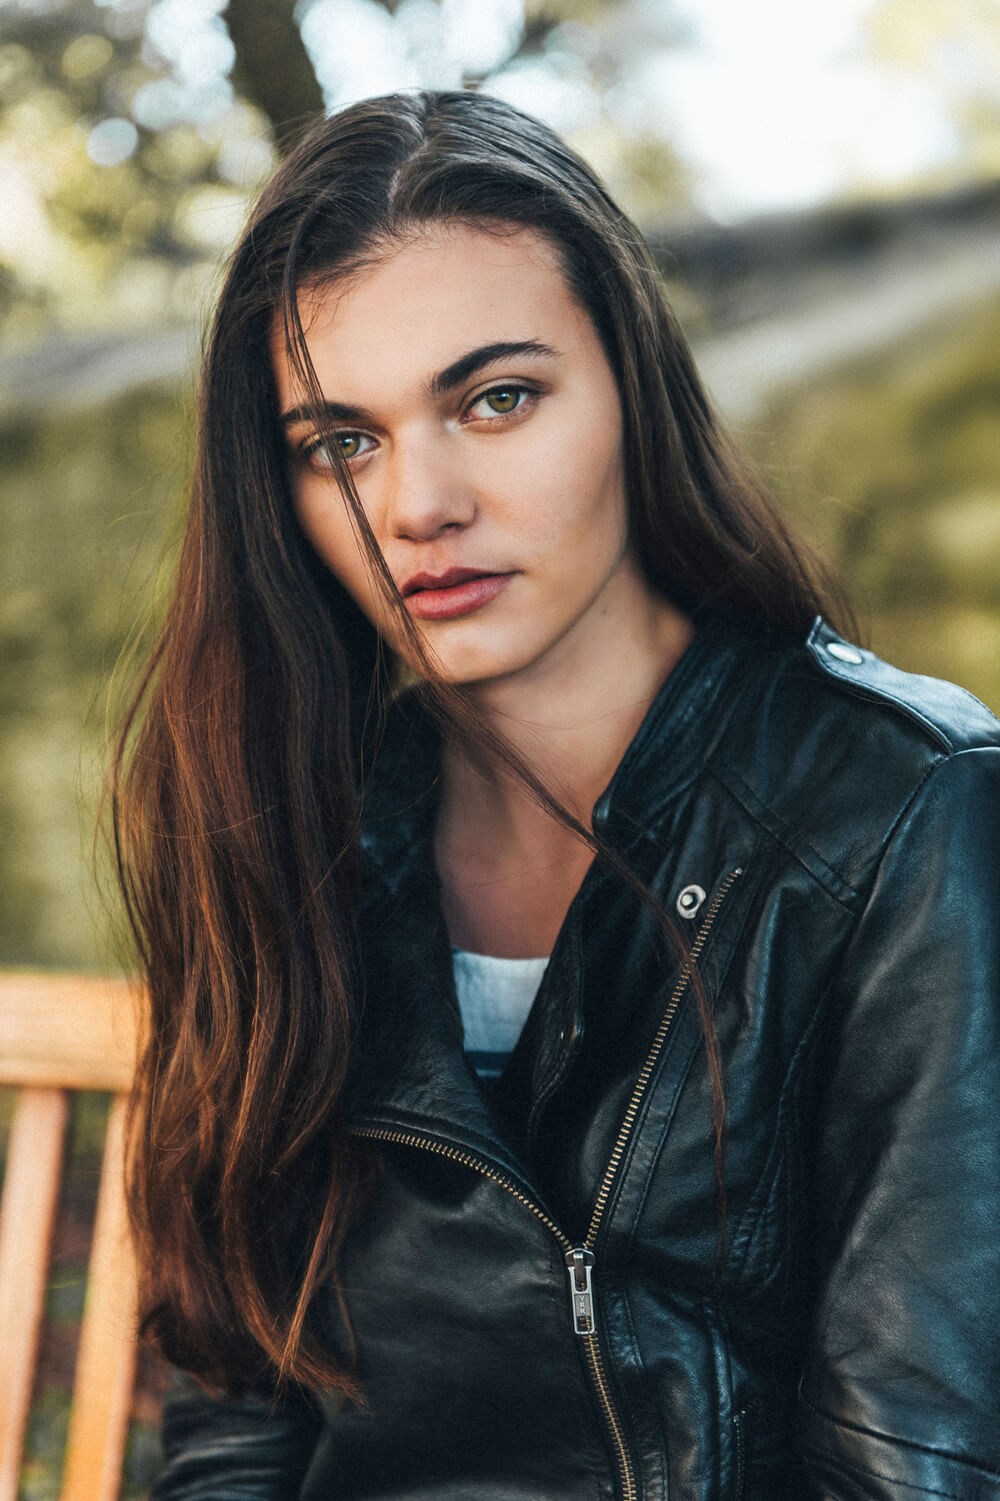 Photo of Cassandra Keogh from IMG Models